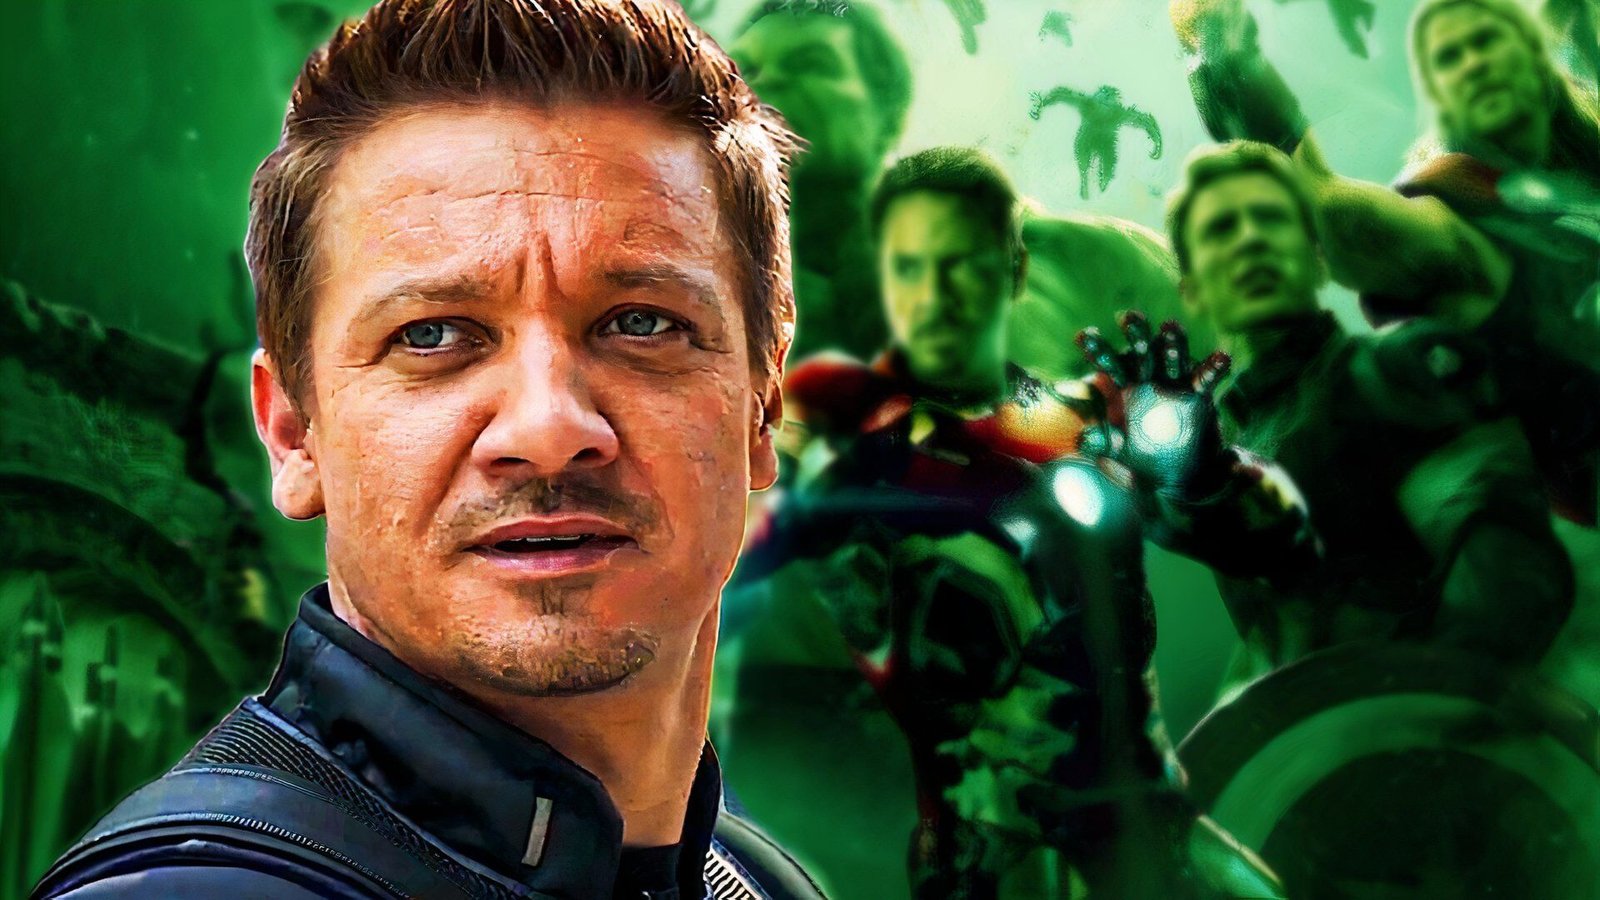 Jeremy Renner Says Avengers Cast Love Isn't Just for Instagram: 'We F*ckin’ Hate That'